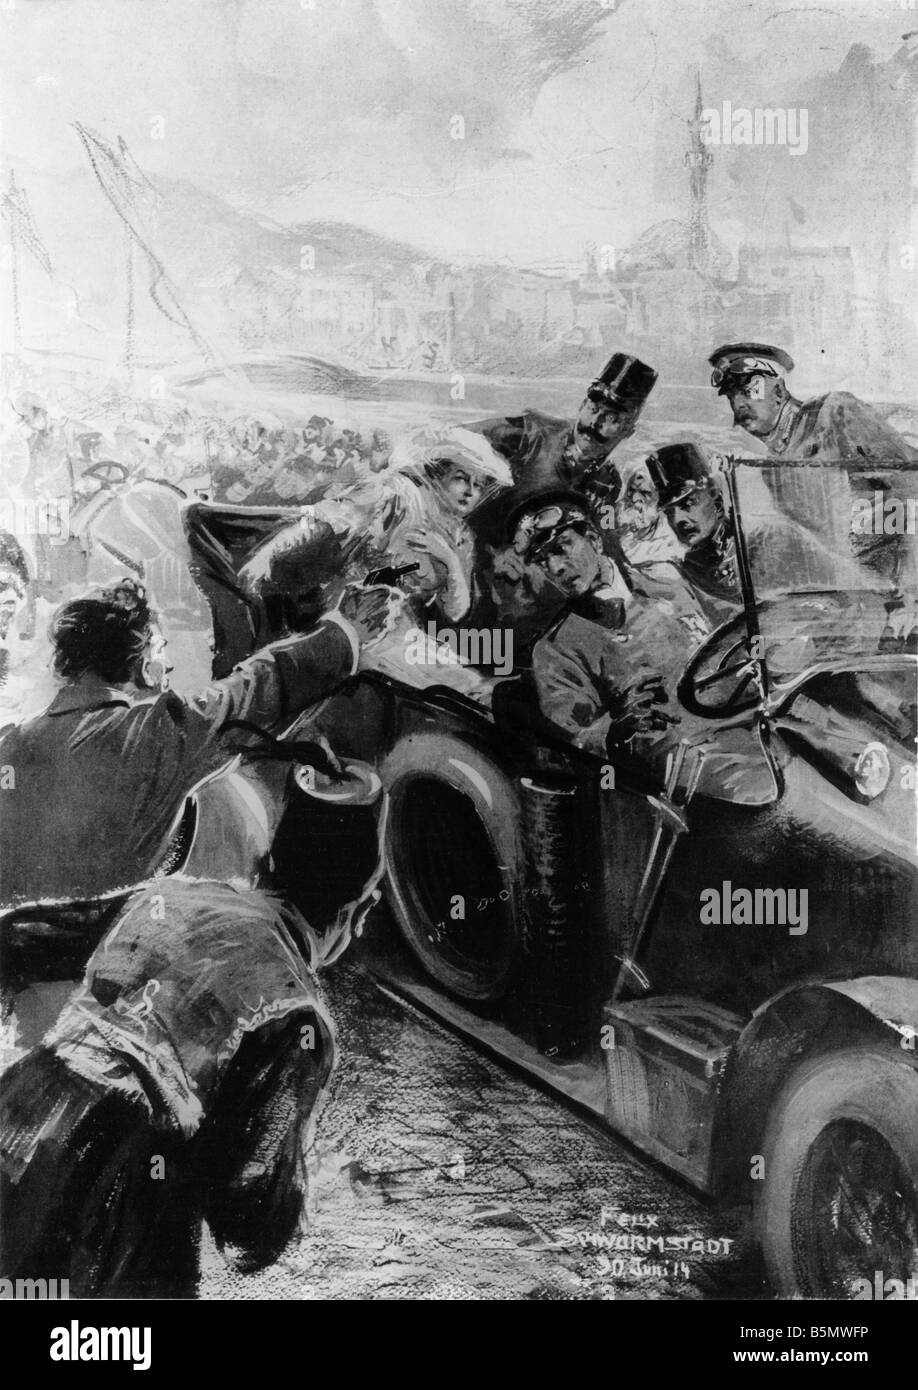 9OE 1914 6 28 A3 Assassination of Franz Ferdinand 1914 History of World War One Assassination of the Austro Hungarian successor Stock Photo